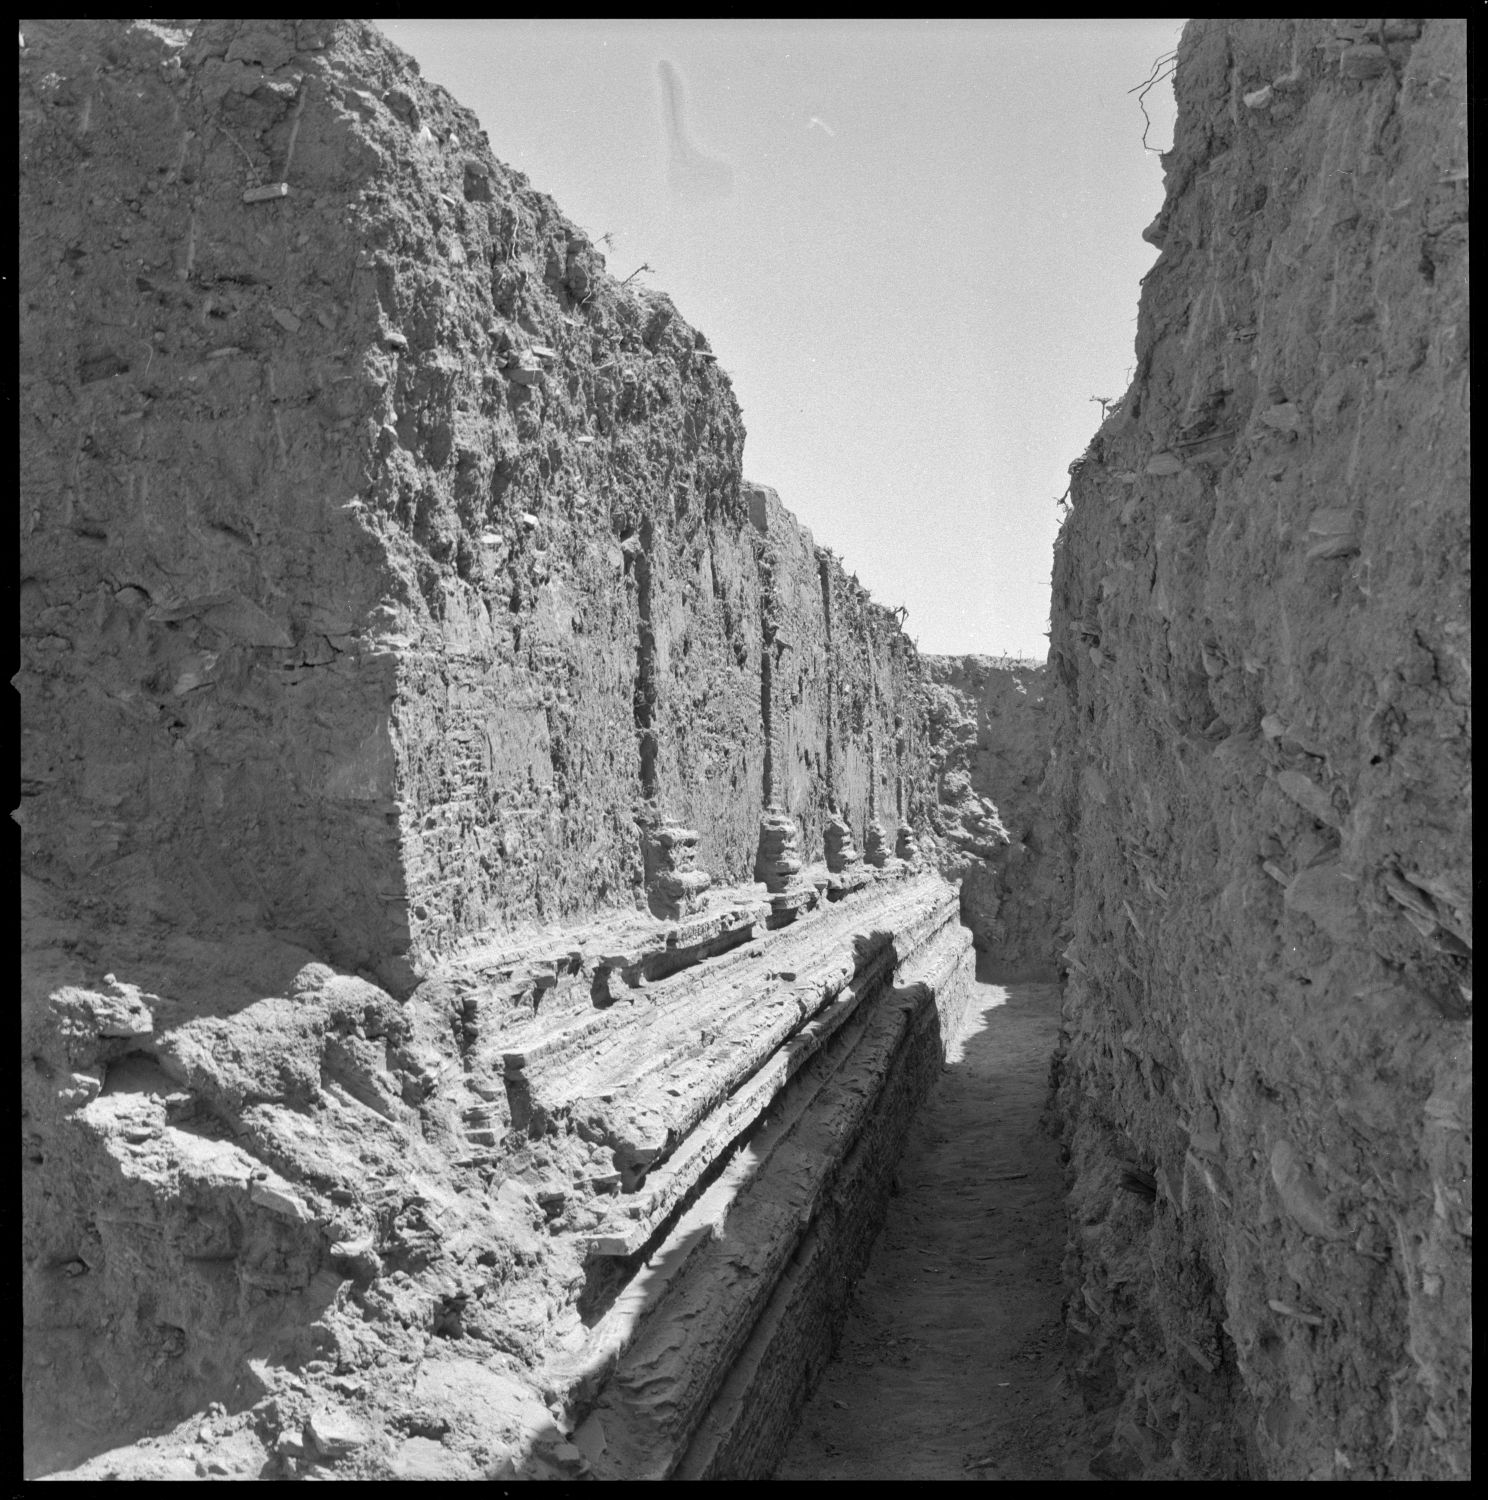 Excavation of main stupa, showing the walls emerging from the trench.